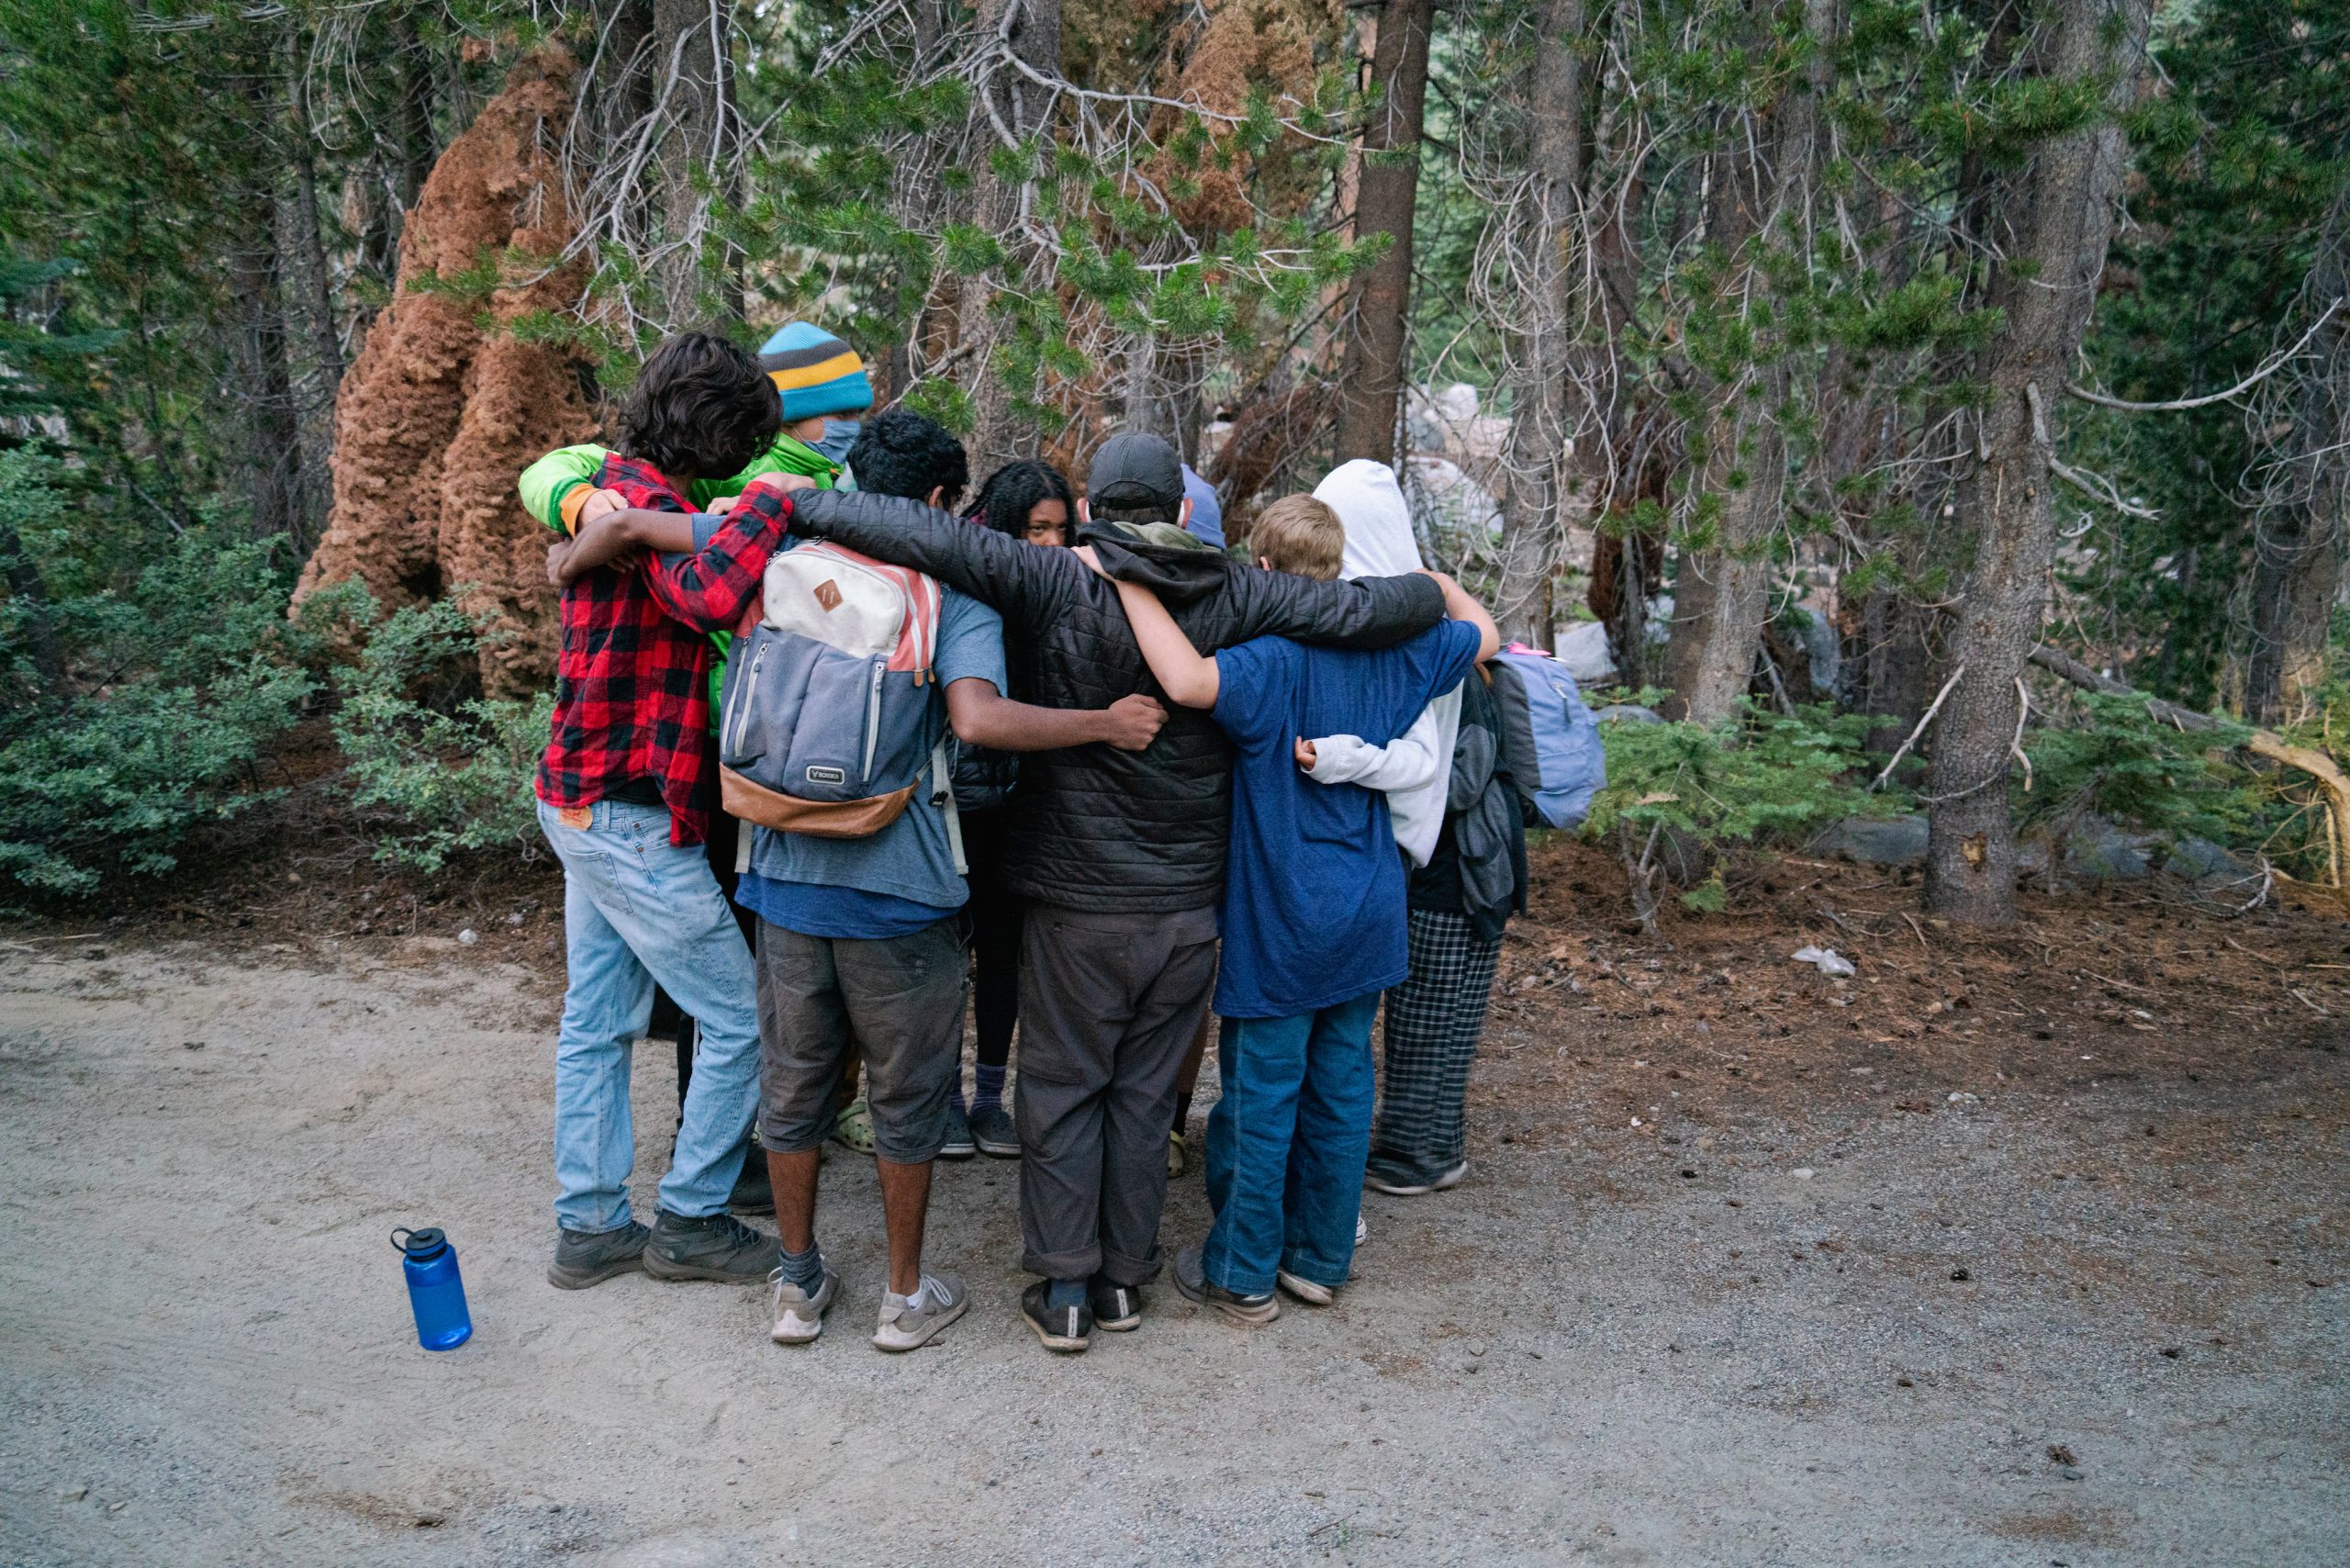 A group of individuals have a group hug outside with trees behind them.